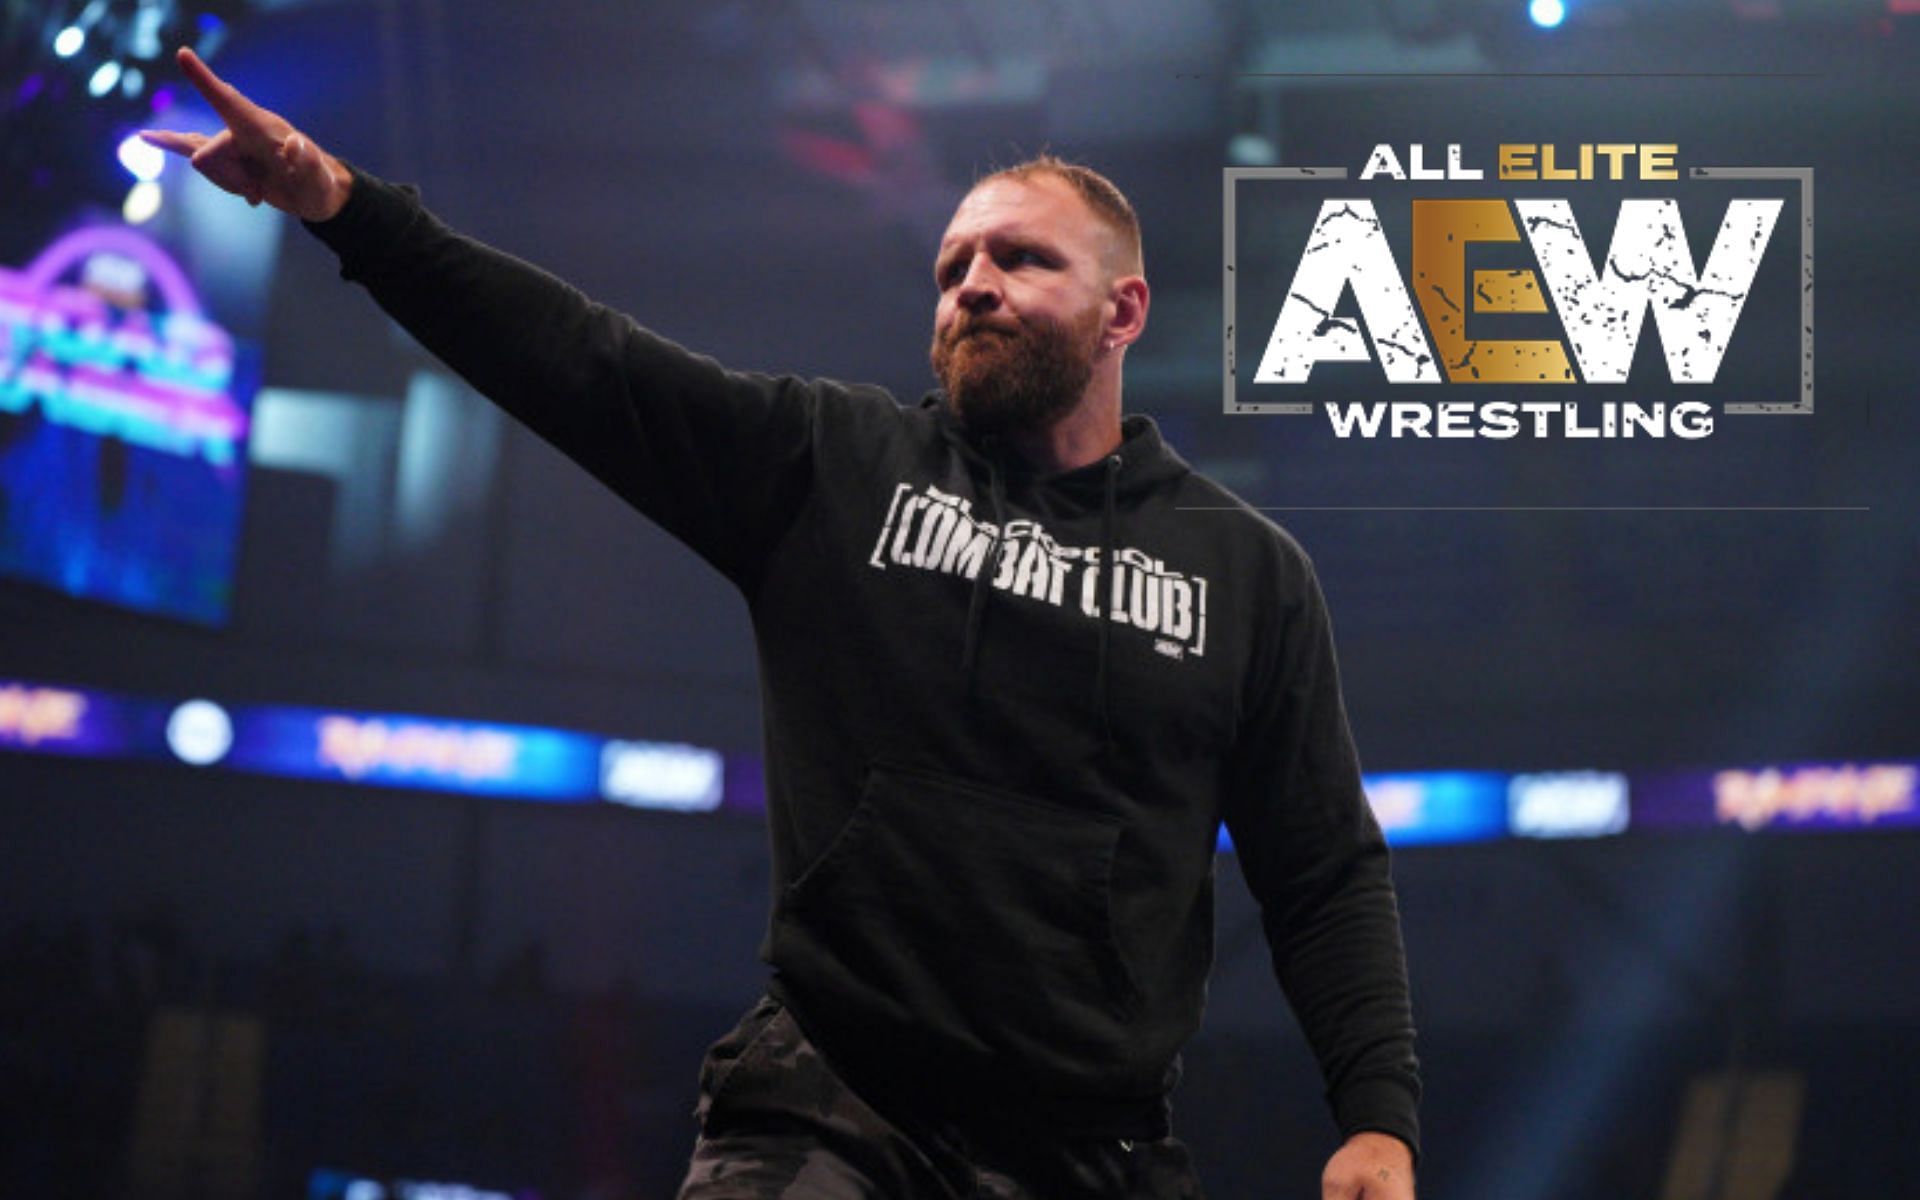 Jon Moxley has been crucial to AEW in the ring and backstage